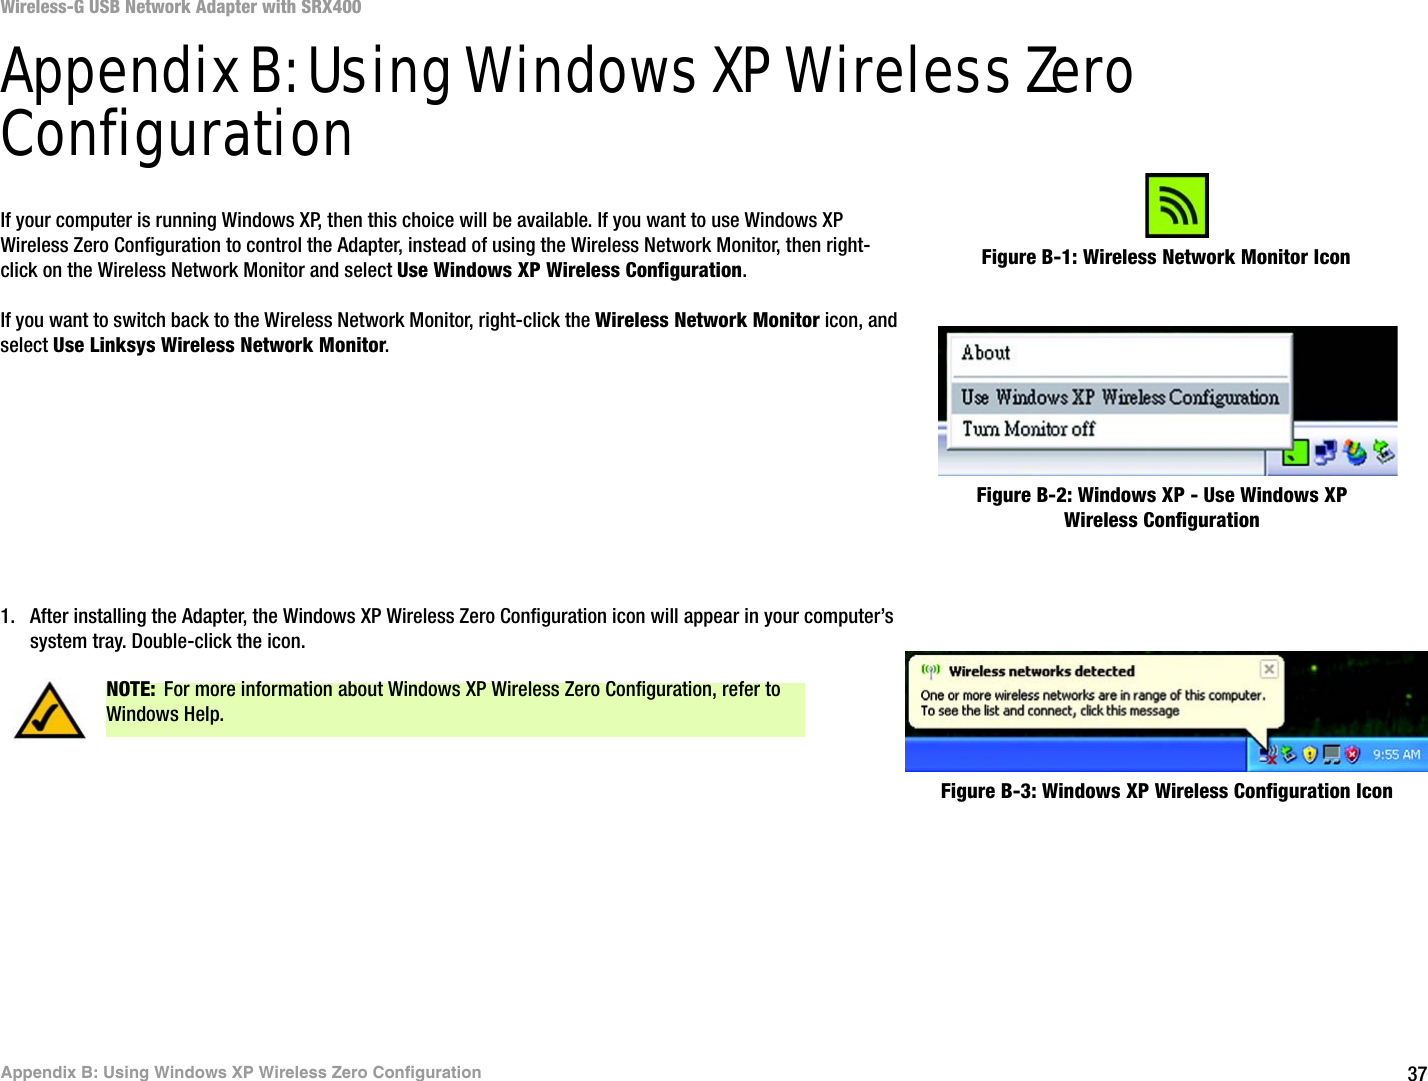 37Appendix B: Using Windows XP Wireless Zero ConfigurationWireless-G USB Network Adapter with SRX400Appendix B: Using Windows XP Wireless Zero ConfigurationIf your computer is running Windows XP, then this choice will be available. If you want to use Windows XP Wireless Zero Configuration to control the Adapter, instead of using the Wireless Network Monitor, then right-click on the Wireless Network Monitor and select Use Windows XP Wireless Configuration. If you want to switch back to the Wireless Network Monitor, right-click the Wireless Network Monitor icon, and select Use Linksys Wireless Network Monitor.1. After installing the Adapter, the Windows XP Wireless Zero Configuration icon will appear in your computer’s system tray. Double-click the icon. Figure B-1: Wireless Network Monitor IconFigure B-2: Windows XP - Use Windows XP Wireless ConfigurationNOTE: For more information about Windows XP Wireless Zero Configuration, refer to Windows Help.Figure B-3: Windows XP Wireless Configuration Icon